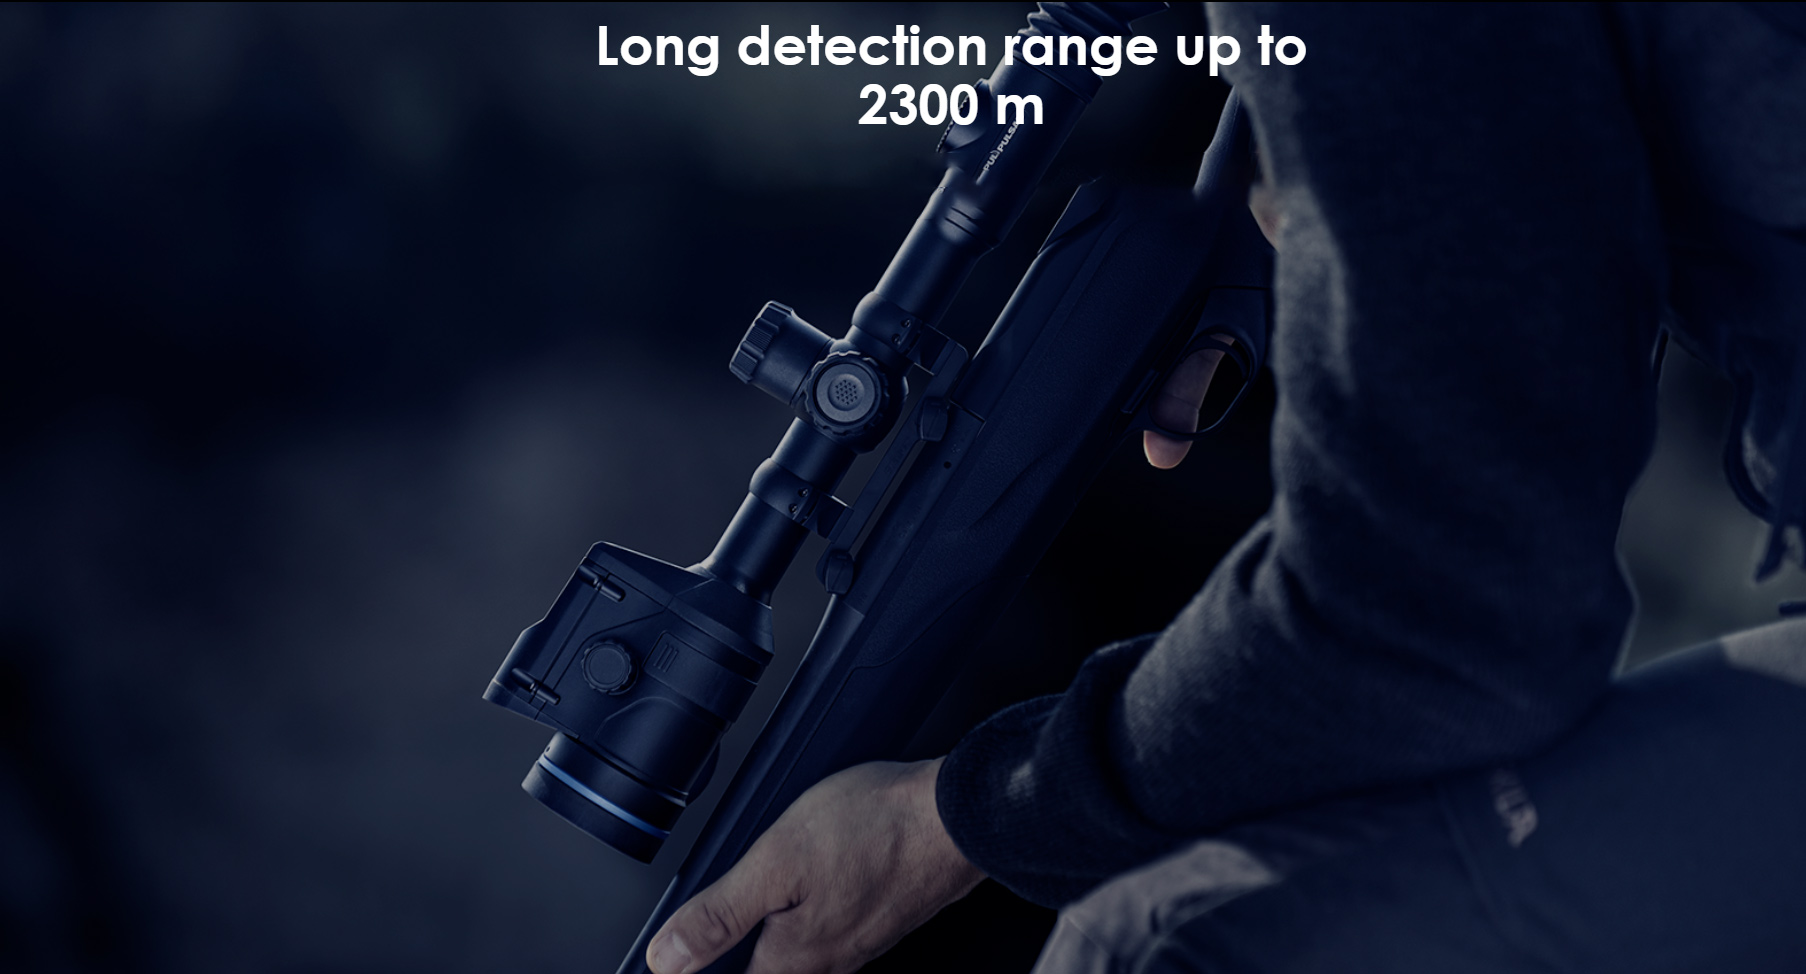 Pulsar Thermion 2 LRF XG50 Thermal Imaging Riflescope - 
        Long detection range up to 2300 m example.